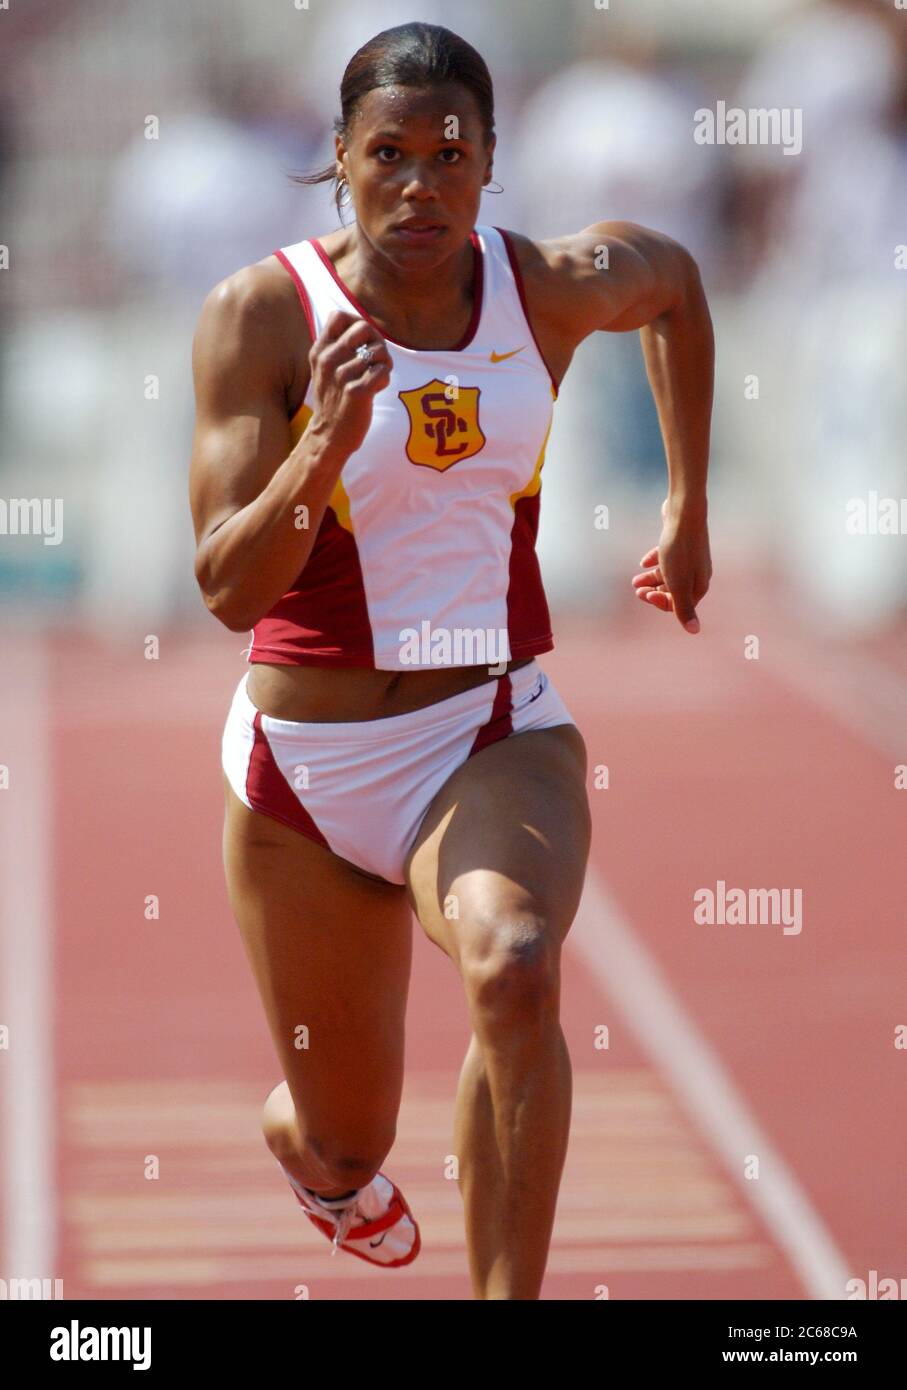 Los Angeles, United States. 01st Apr, 2006. Virginia Powell of USC wins the women's 100 meters in a wind-aided 11.17 in the Cardinal & Gold Invitational at Cromwell Field in Los Angeles on Saturday, April 1, 2006. Photo via Credit: Newscom/Alamy Live News Stock Photo